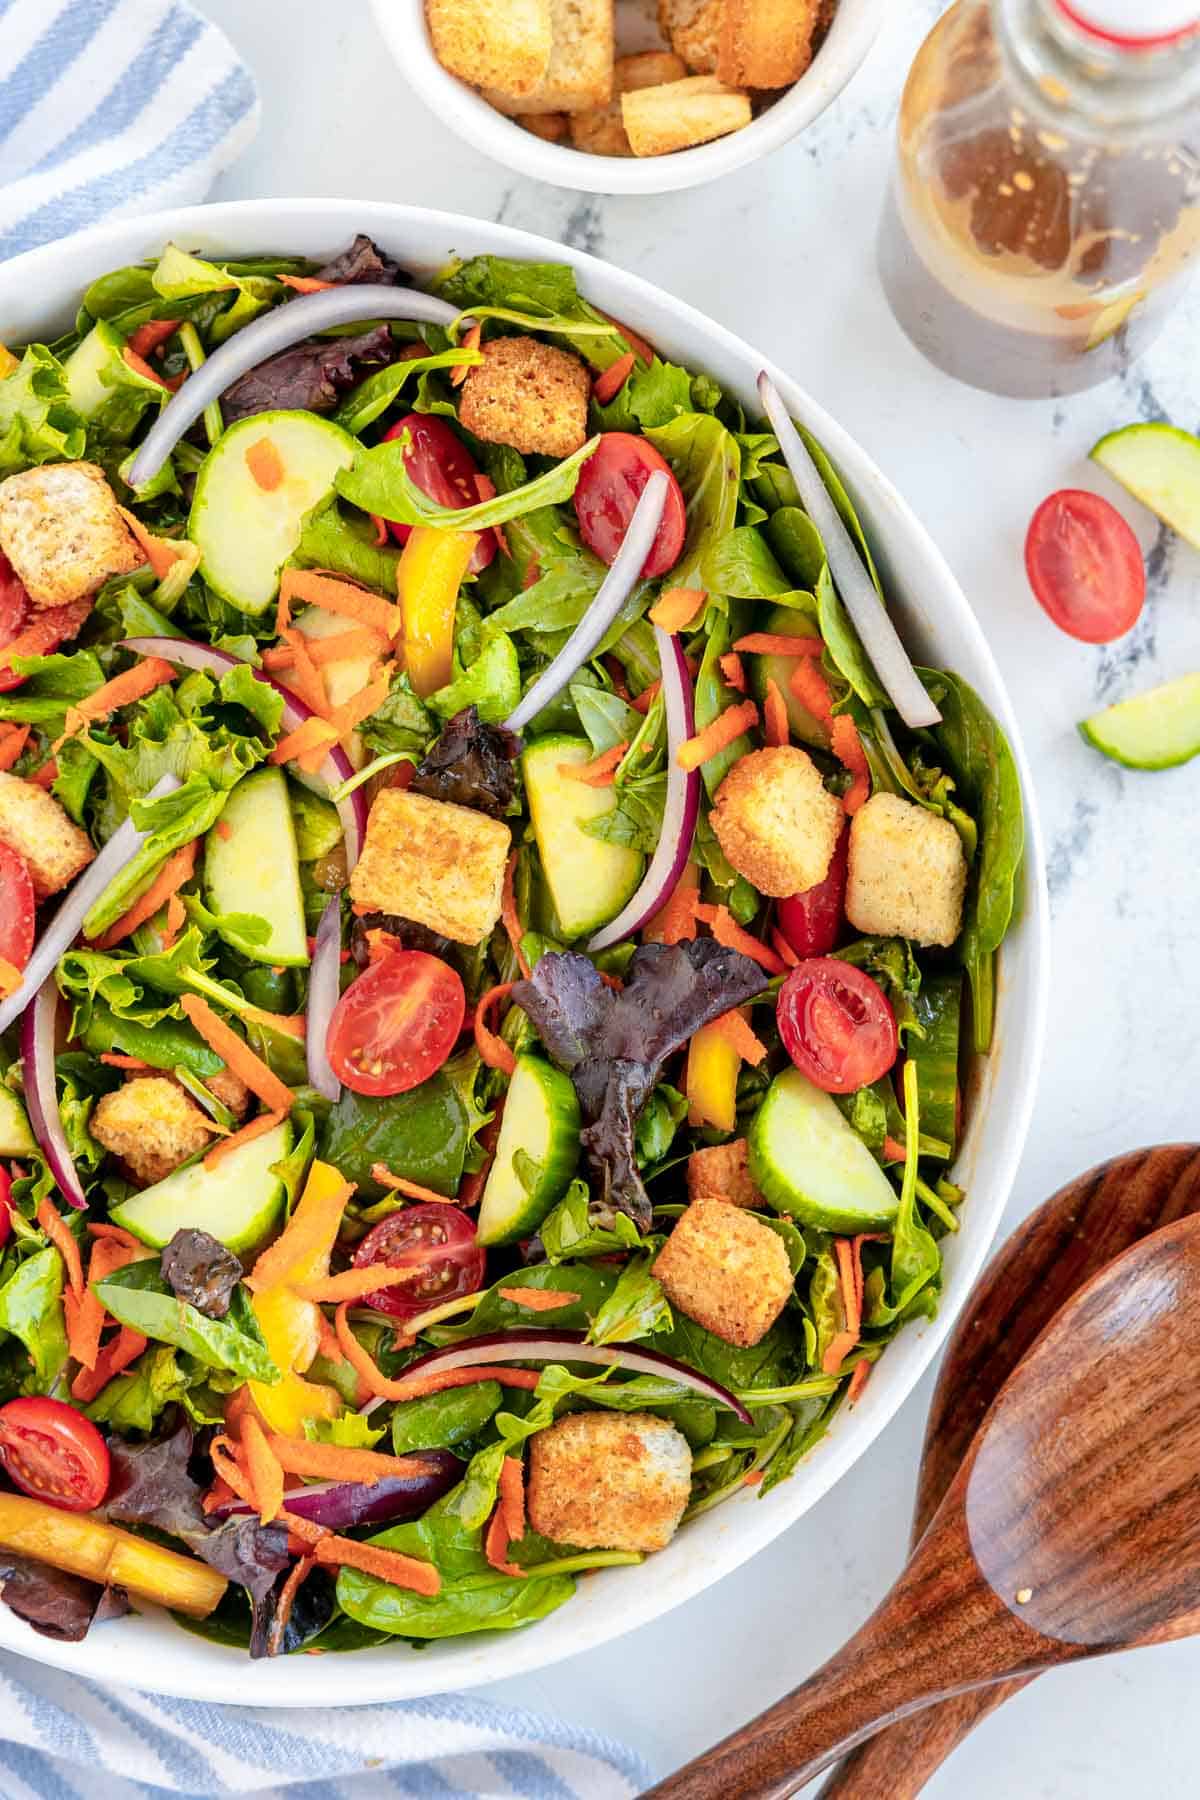  Garden salad with fresh vegetables and crunchy croutons, served in a clean white bowl.